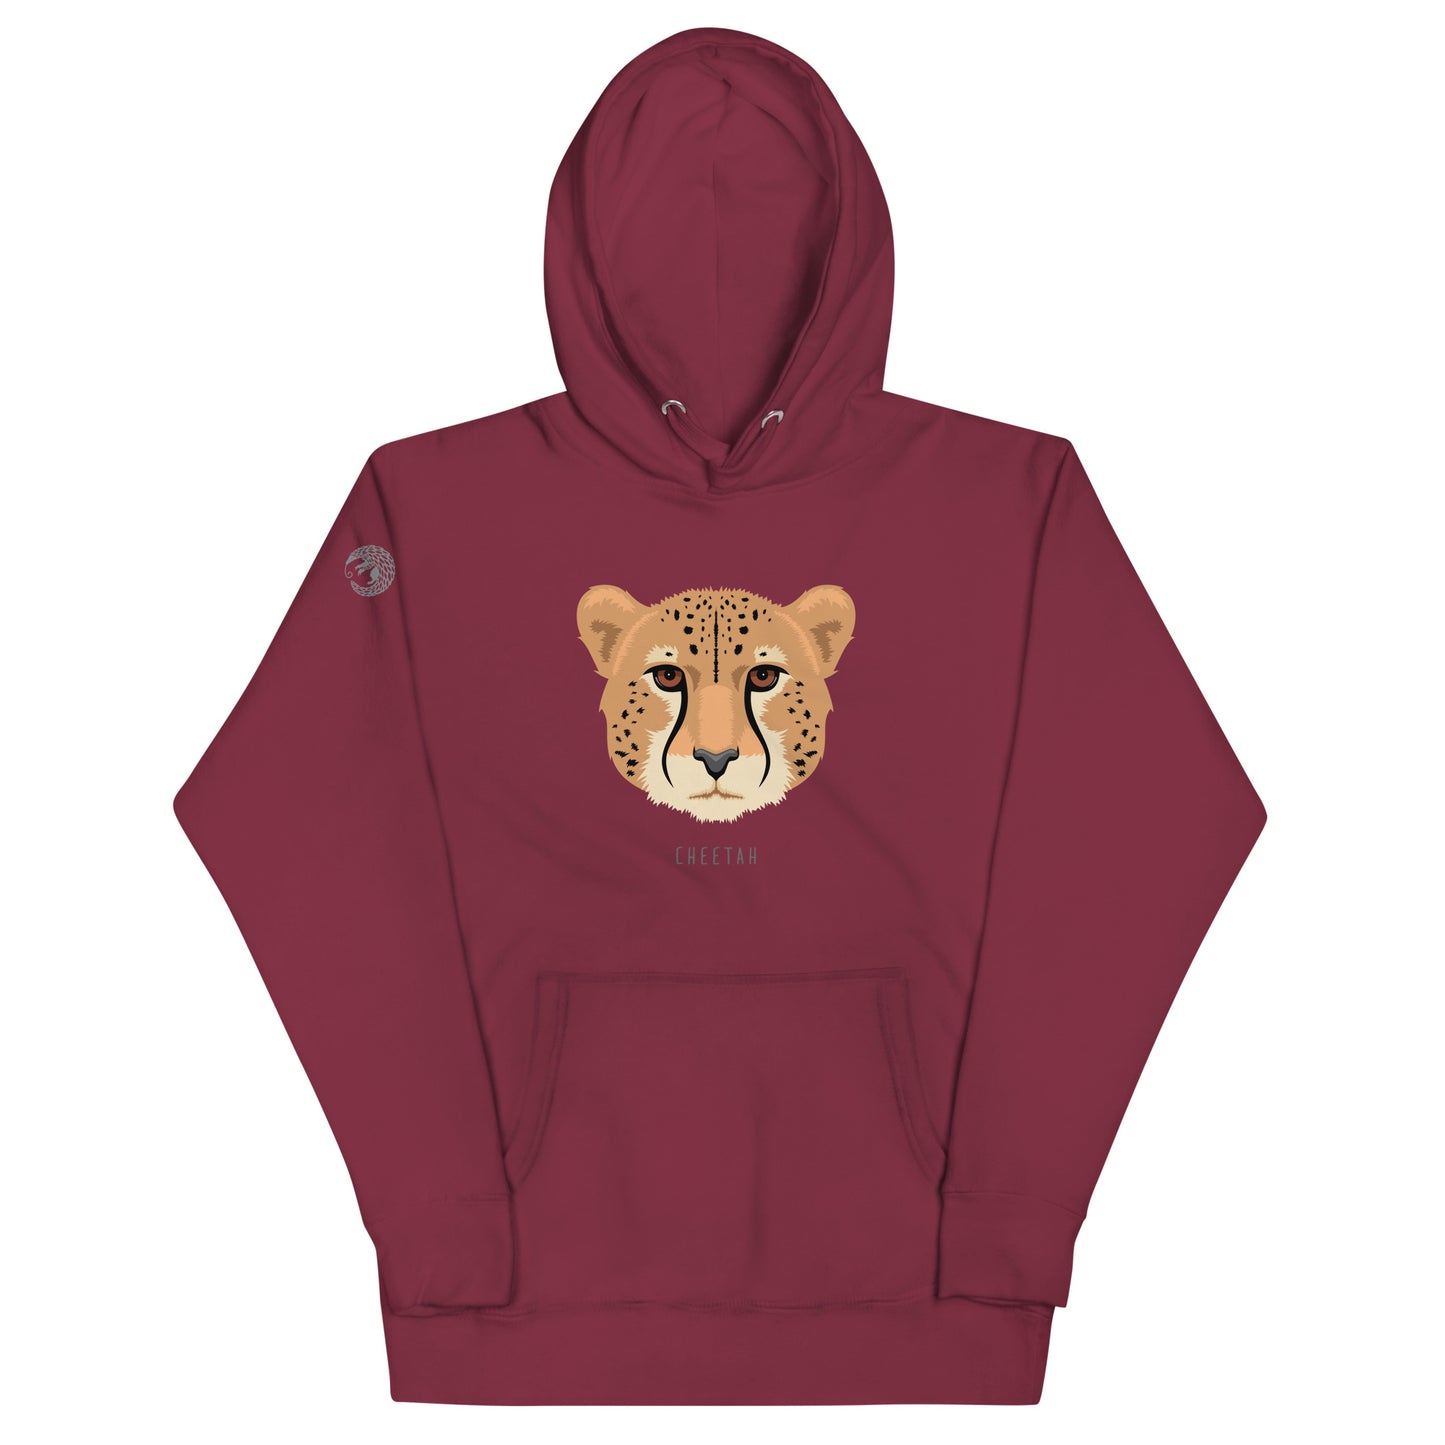 A maroon, hooded, pullover sweatshirt with an illustration of a cheetah's face and thew world "cheetah" beneath it. 